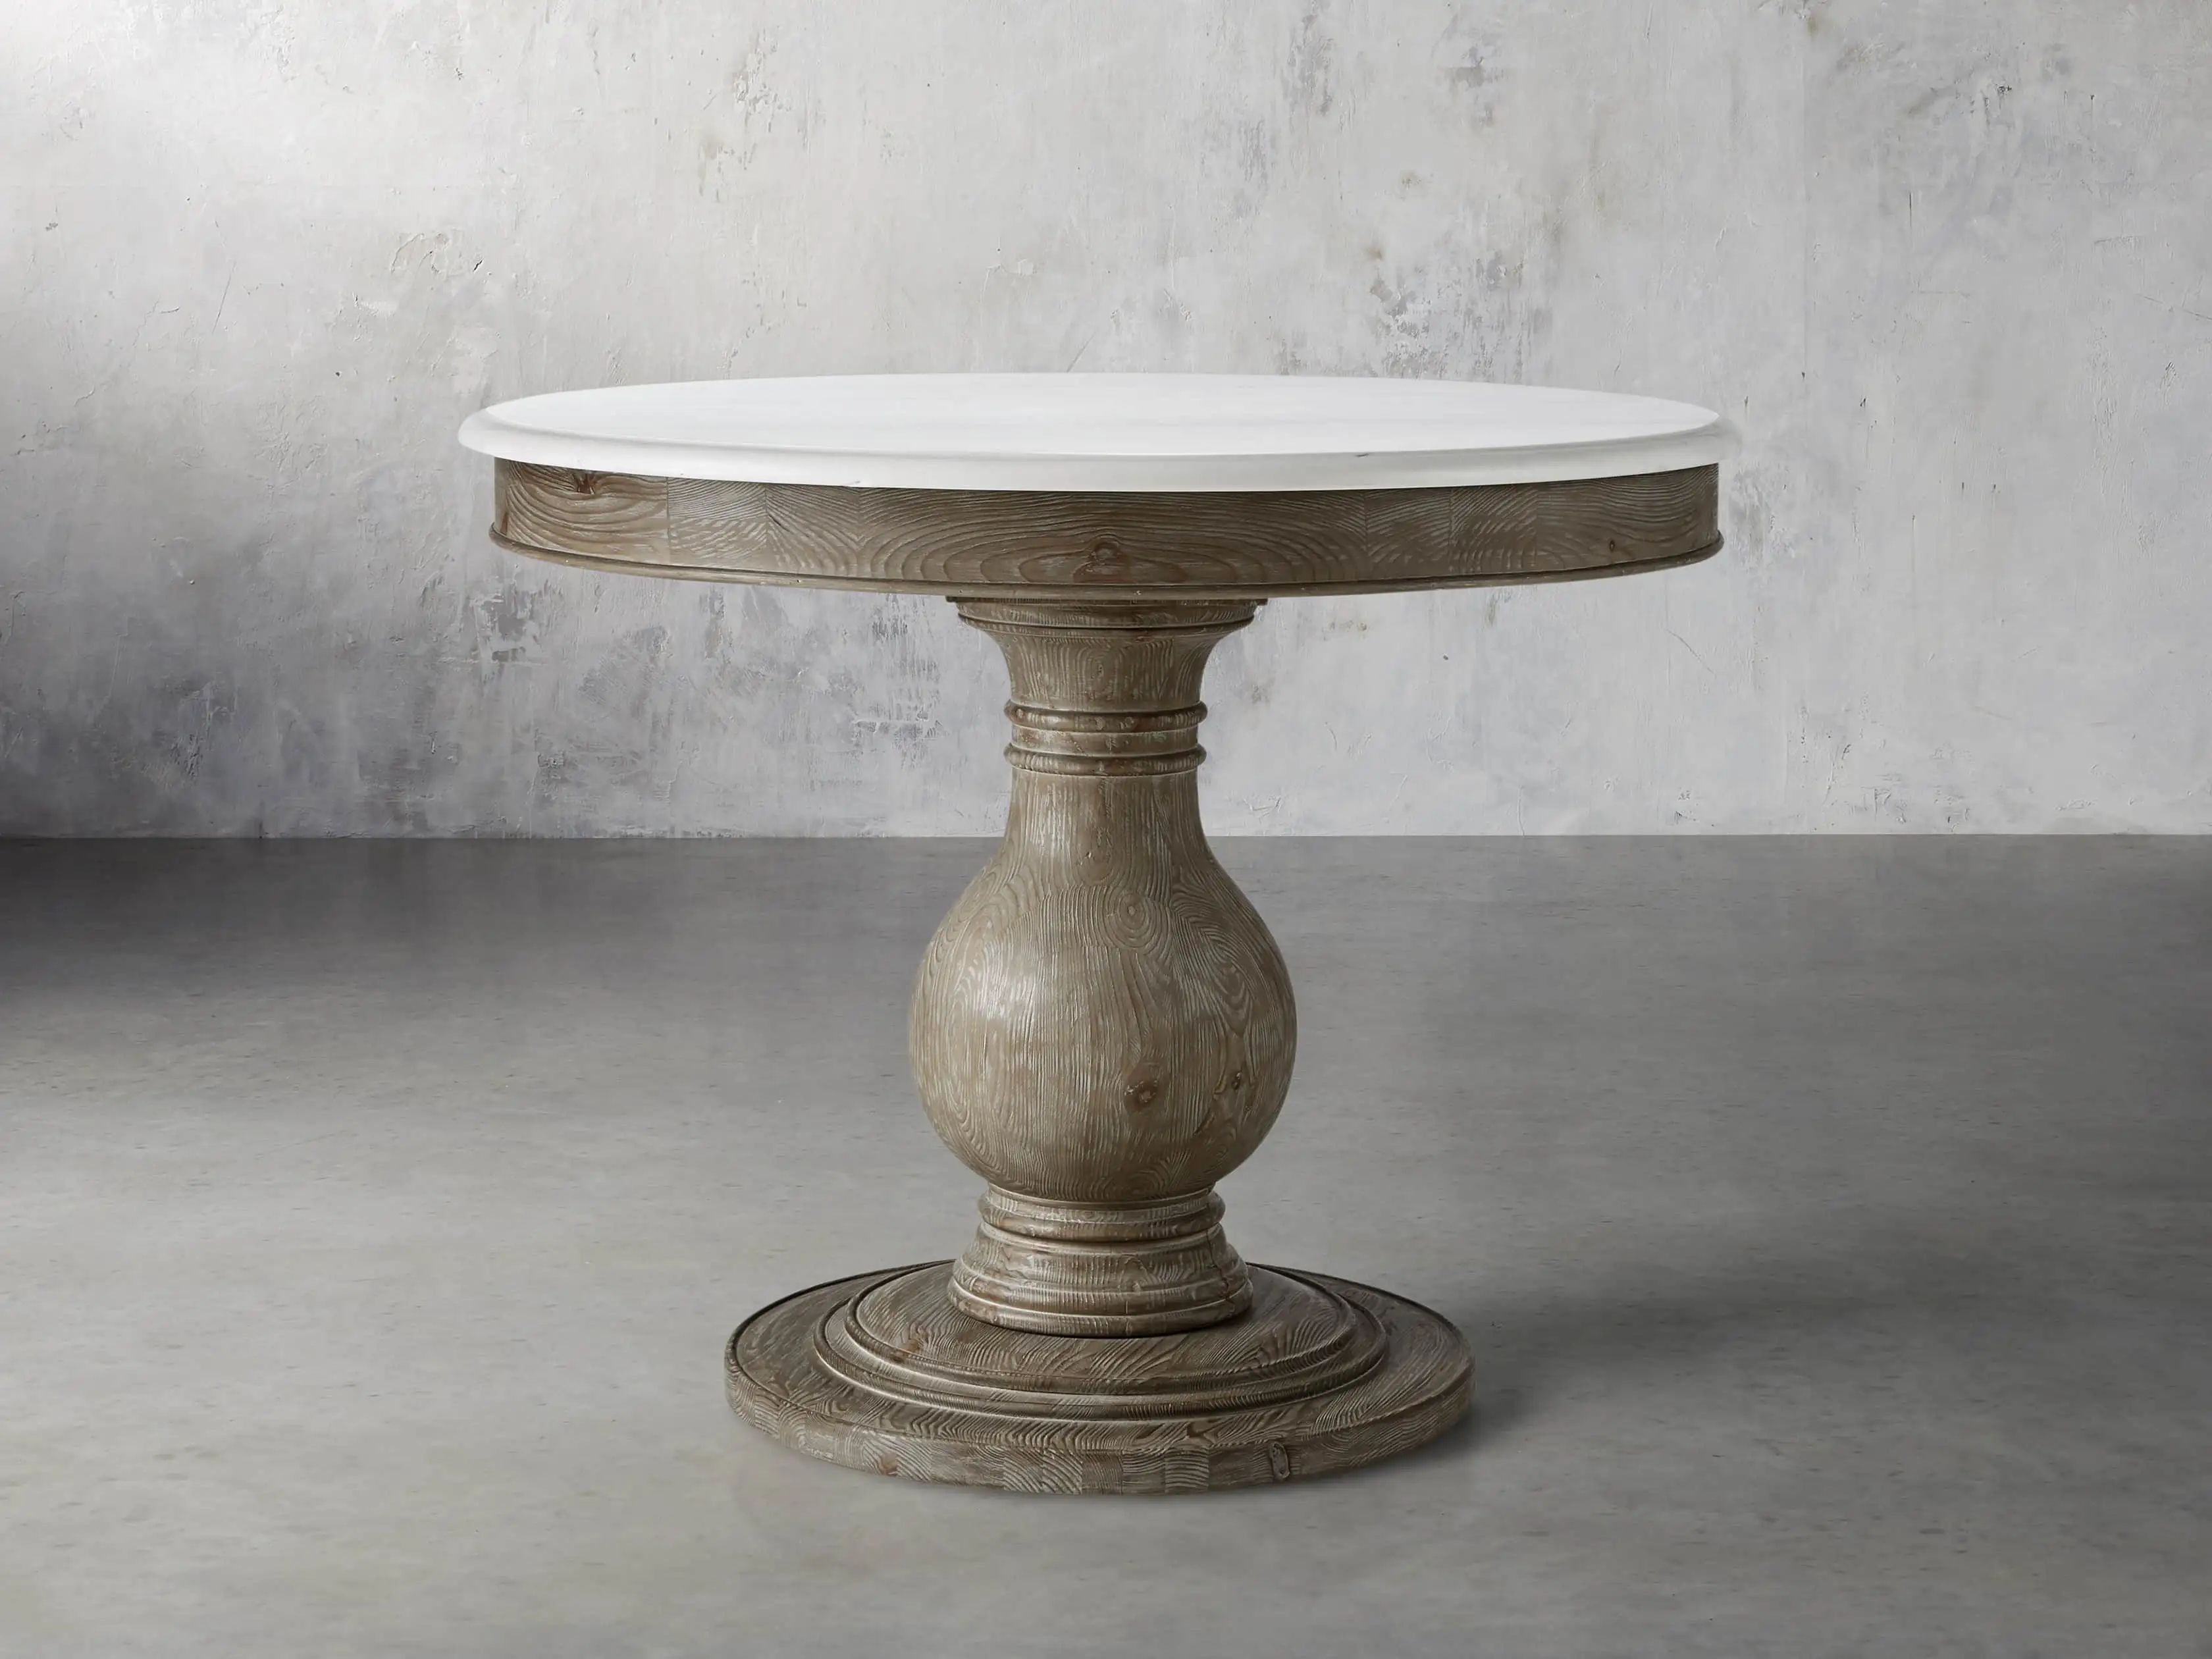 Luca 60"" Round Pedestal Dining Table with White Marble Top in Rustic Grey | Arhaus